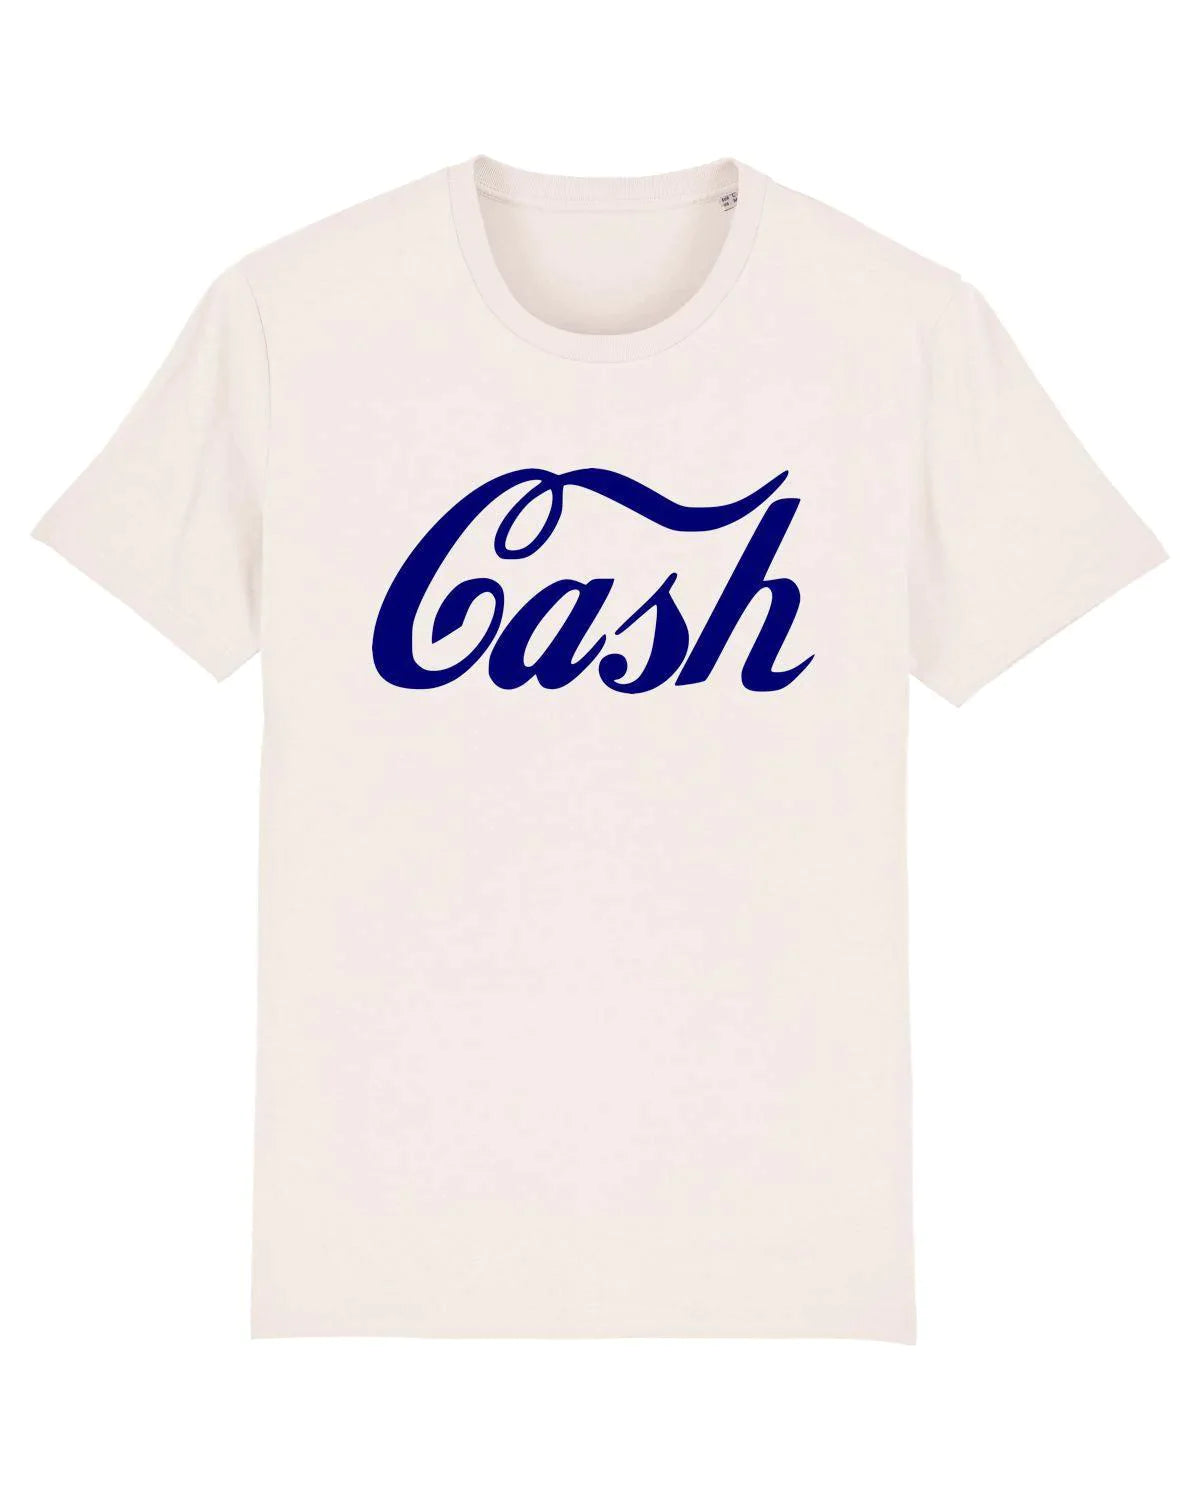 CASH:  T-Shirt As Worn by Jack White (The White Stripes) Many Colours - SOUND IS COLOUR